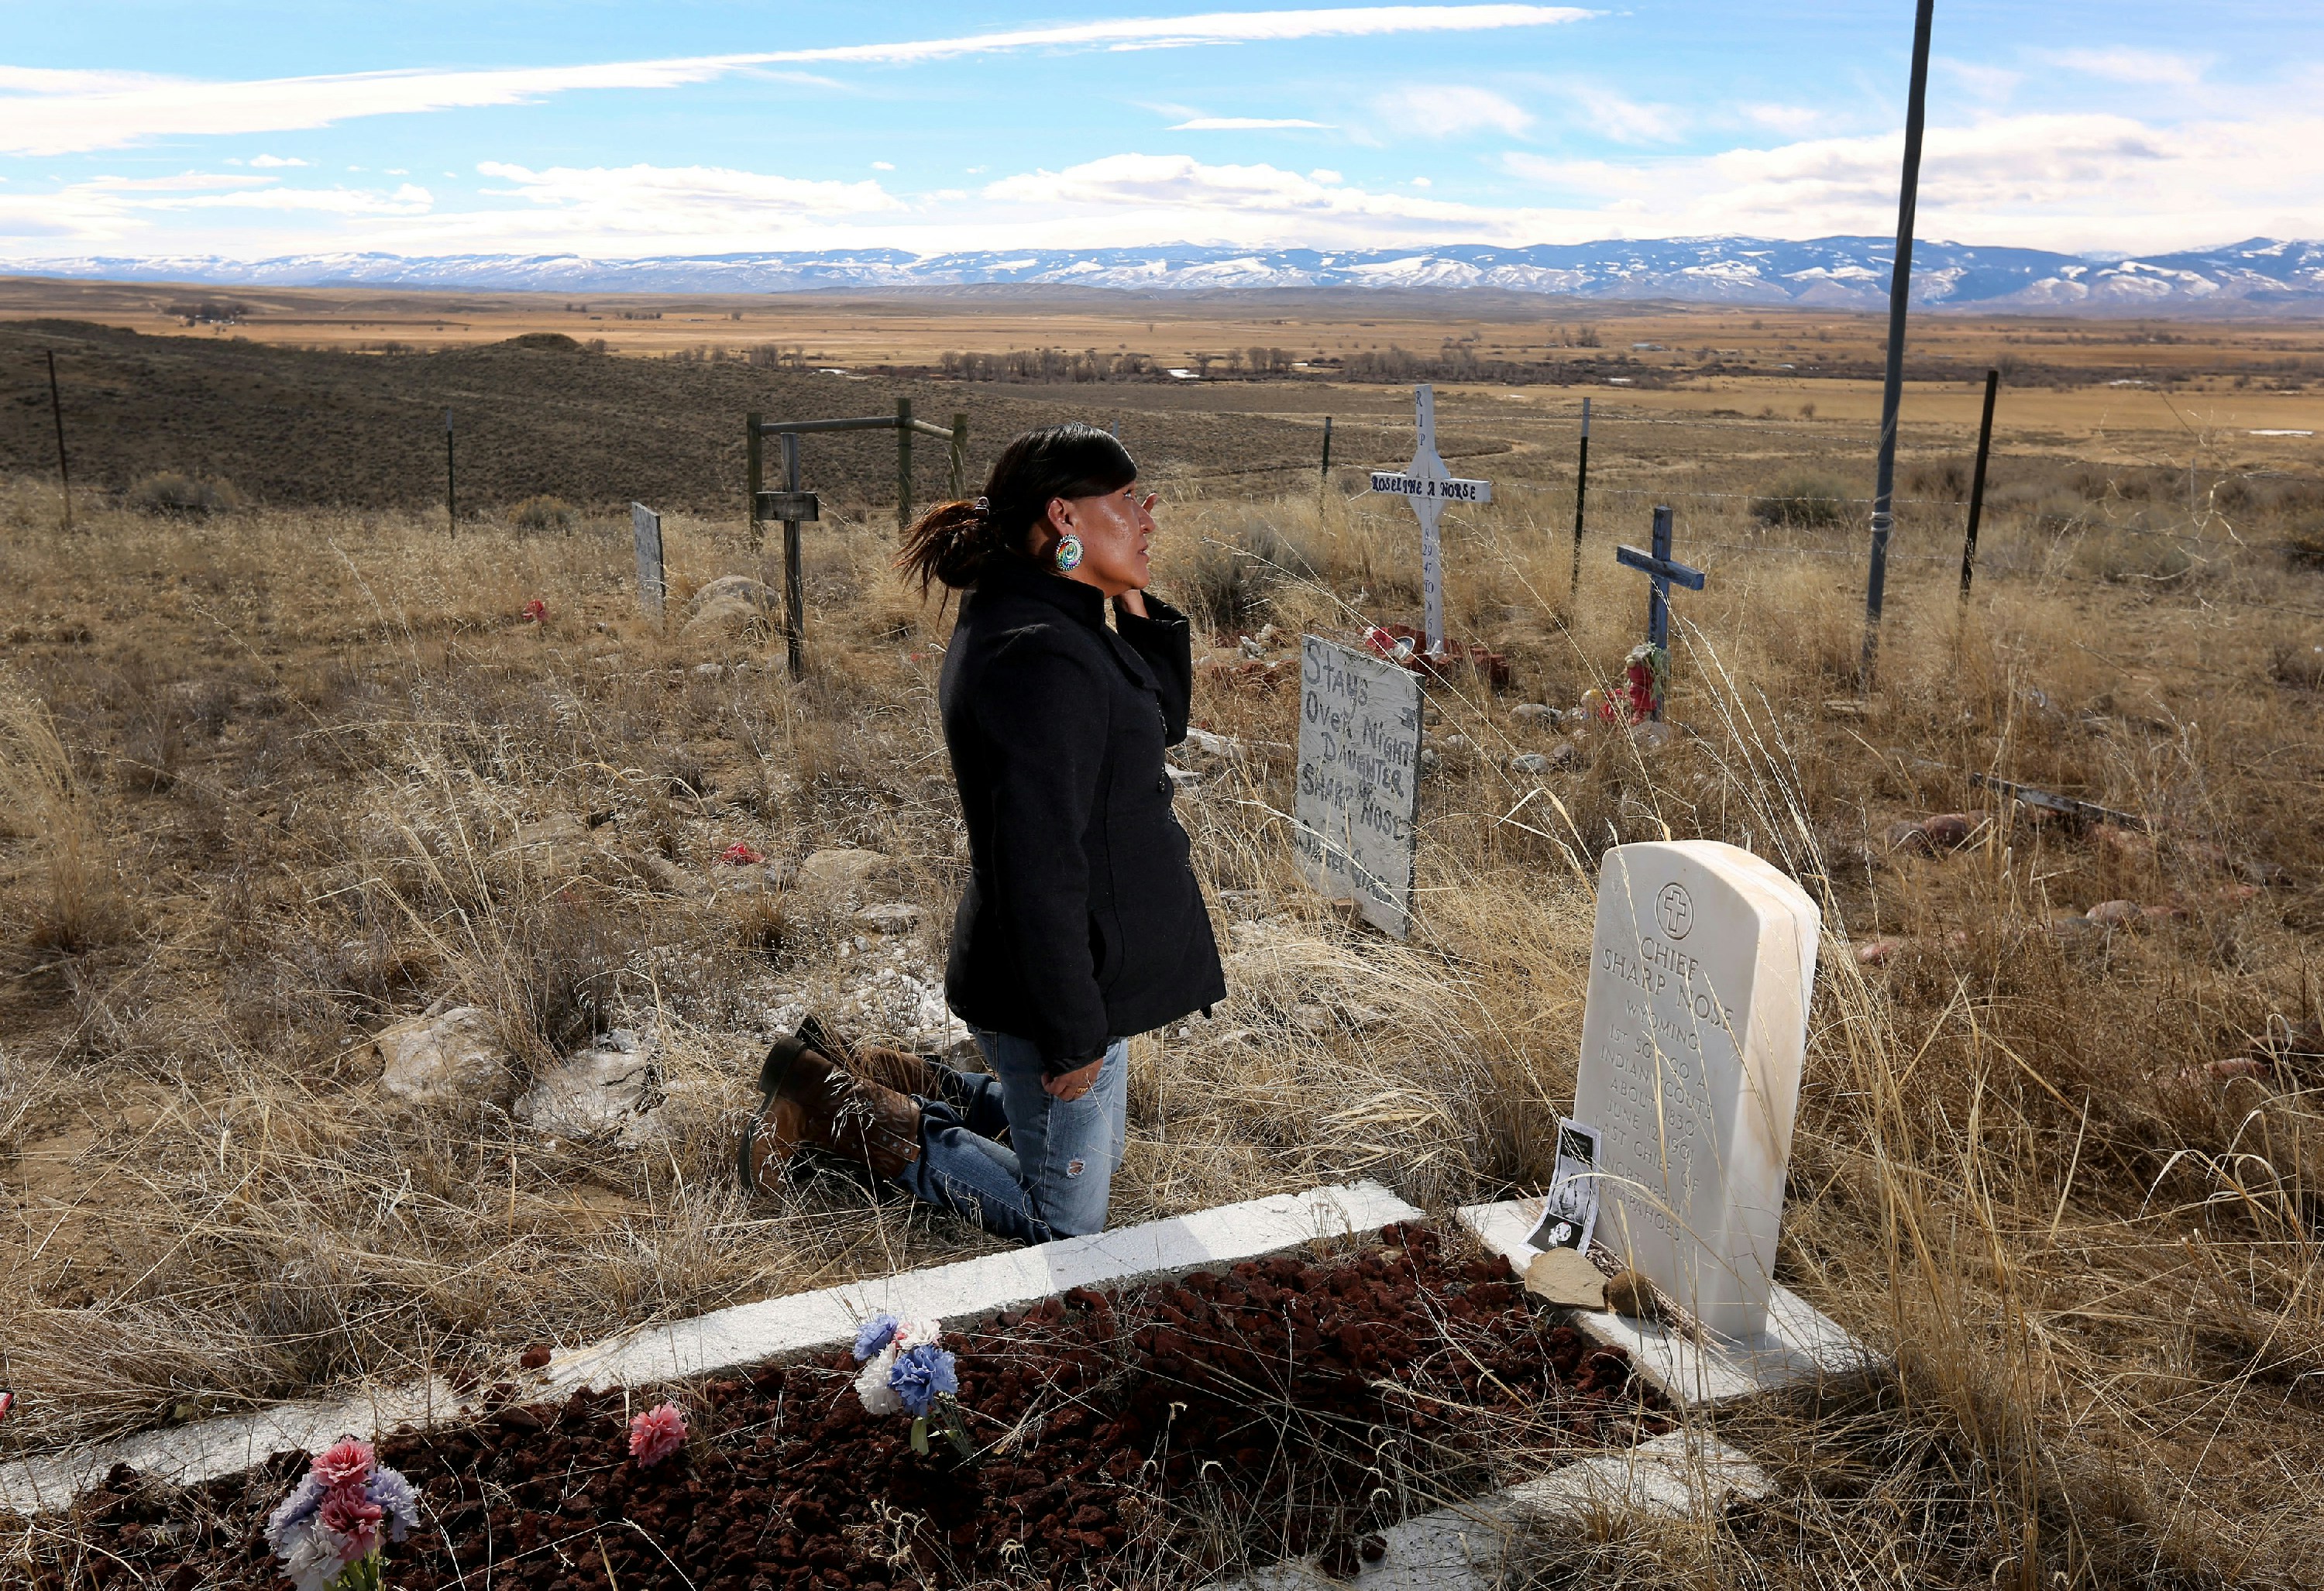 ADVANCE FOR WEEKEND EDITIONS - In this March 1, 2016 photo, Yufna Soldier Wolf wipes away tears while kneeling at the grave of her great-grandfather, Chief Sharp Nose of the Northern Arapaho Tribe, at the family cemetery on the Wind River Reservation near Riverton, Wyo. Soldier Wolf is seeking the remains of her great-uncle Little Chief, who died while attending Carlisle Indian School in Carlisle, Pennsylvania. (Dan Cepeda/The Casper Star-Tribune via AP) MANDATORY CREDIT